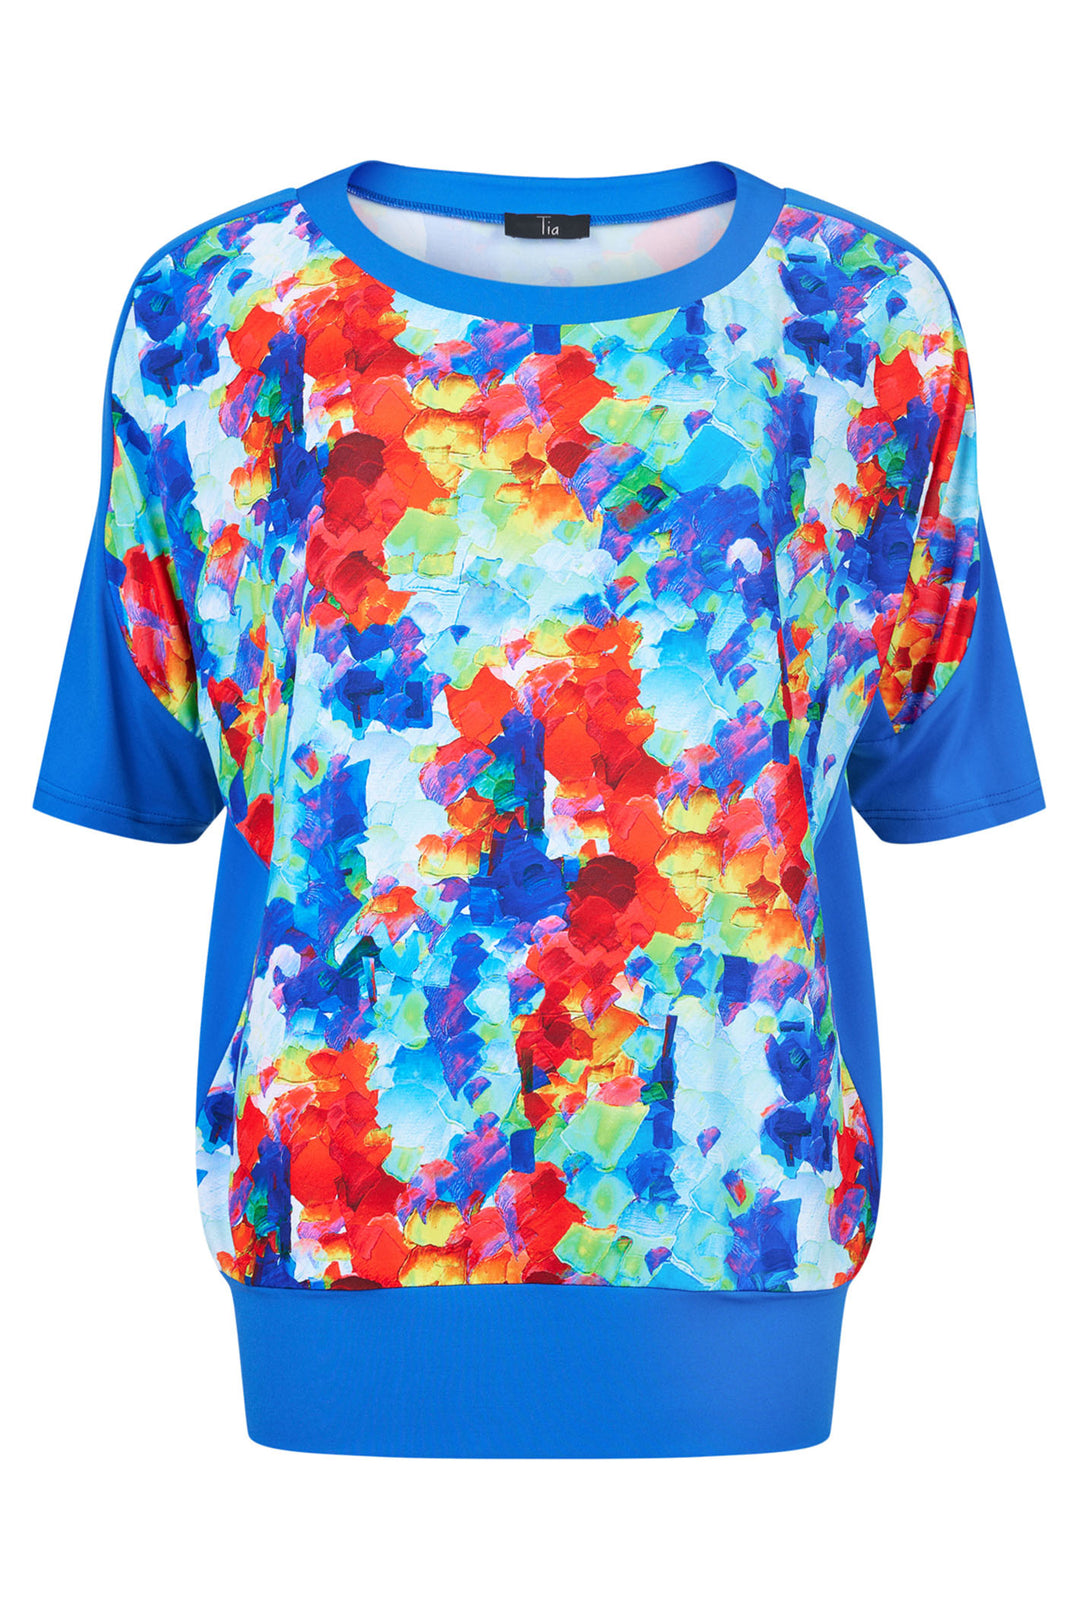 Tia 73054-7792-65 Blue Abstract Print Short Sleeve Top - Rouge Boutique Inverness